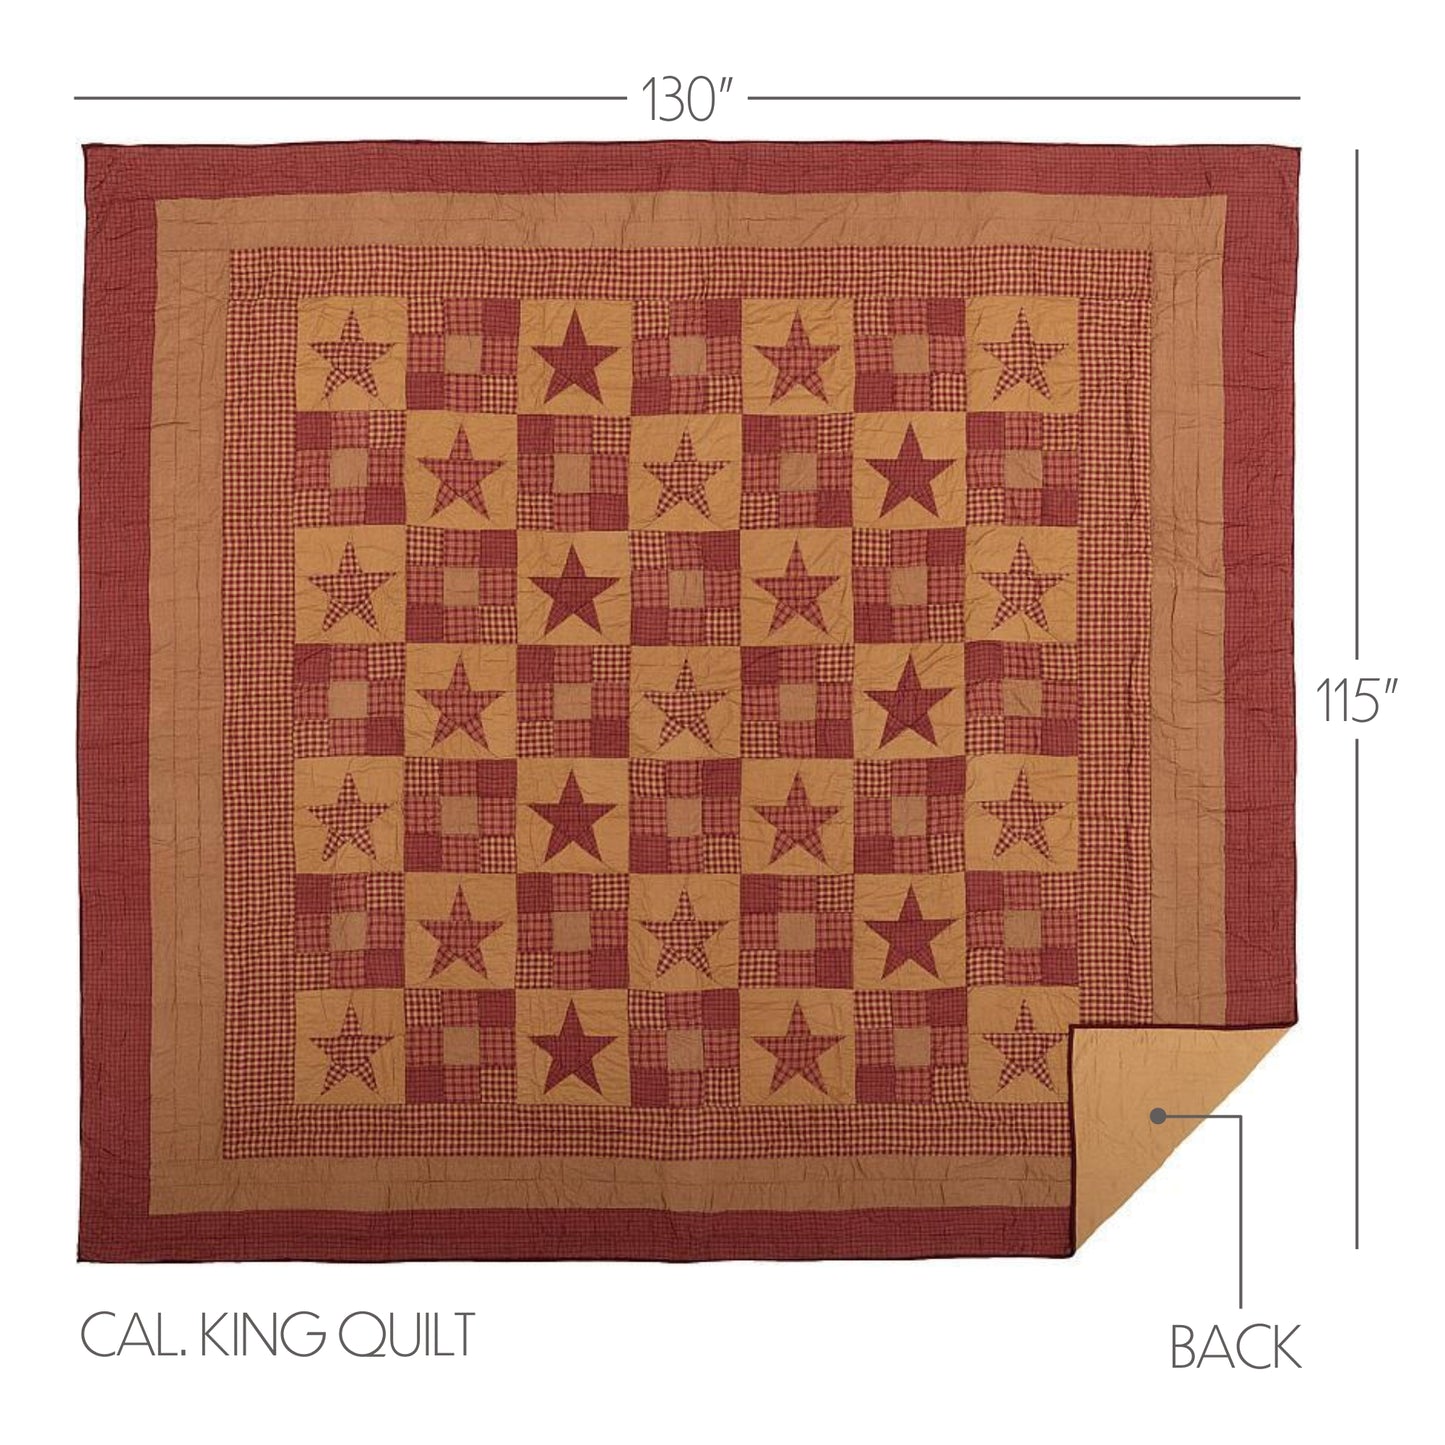 51248-Ninepatch-Star-California-King-Quilt-130Wx115L-image-1